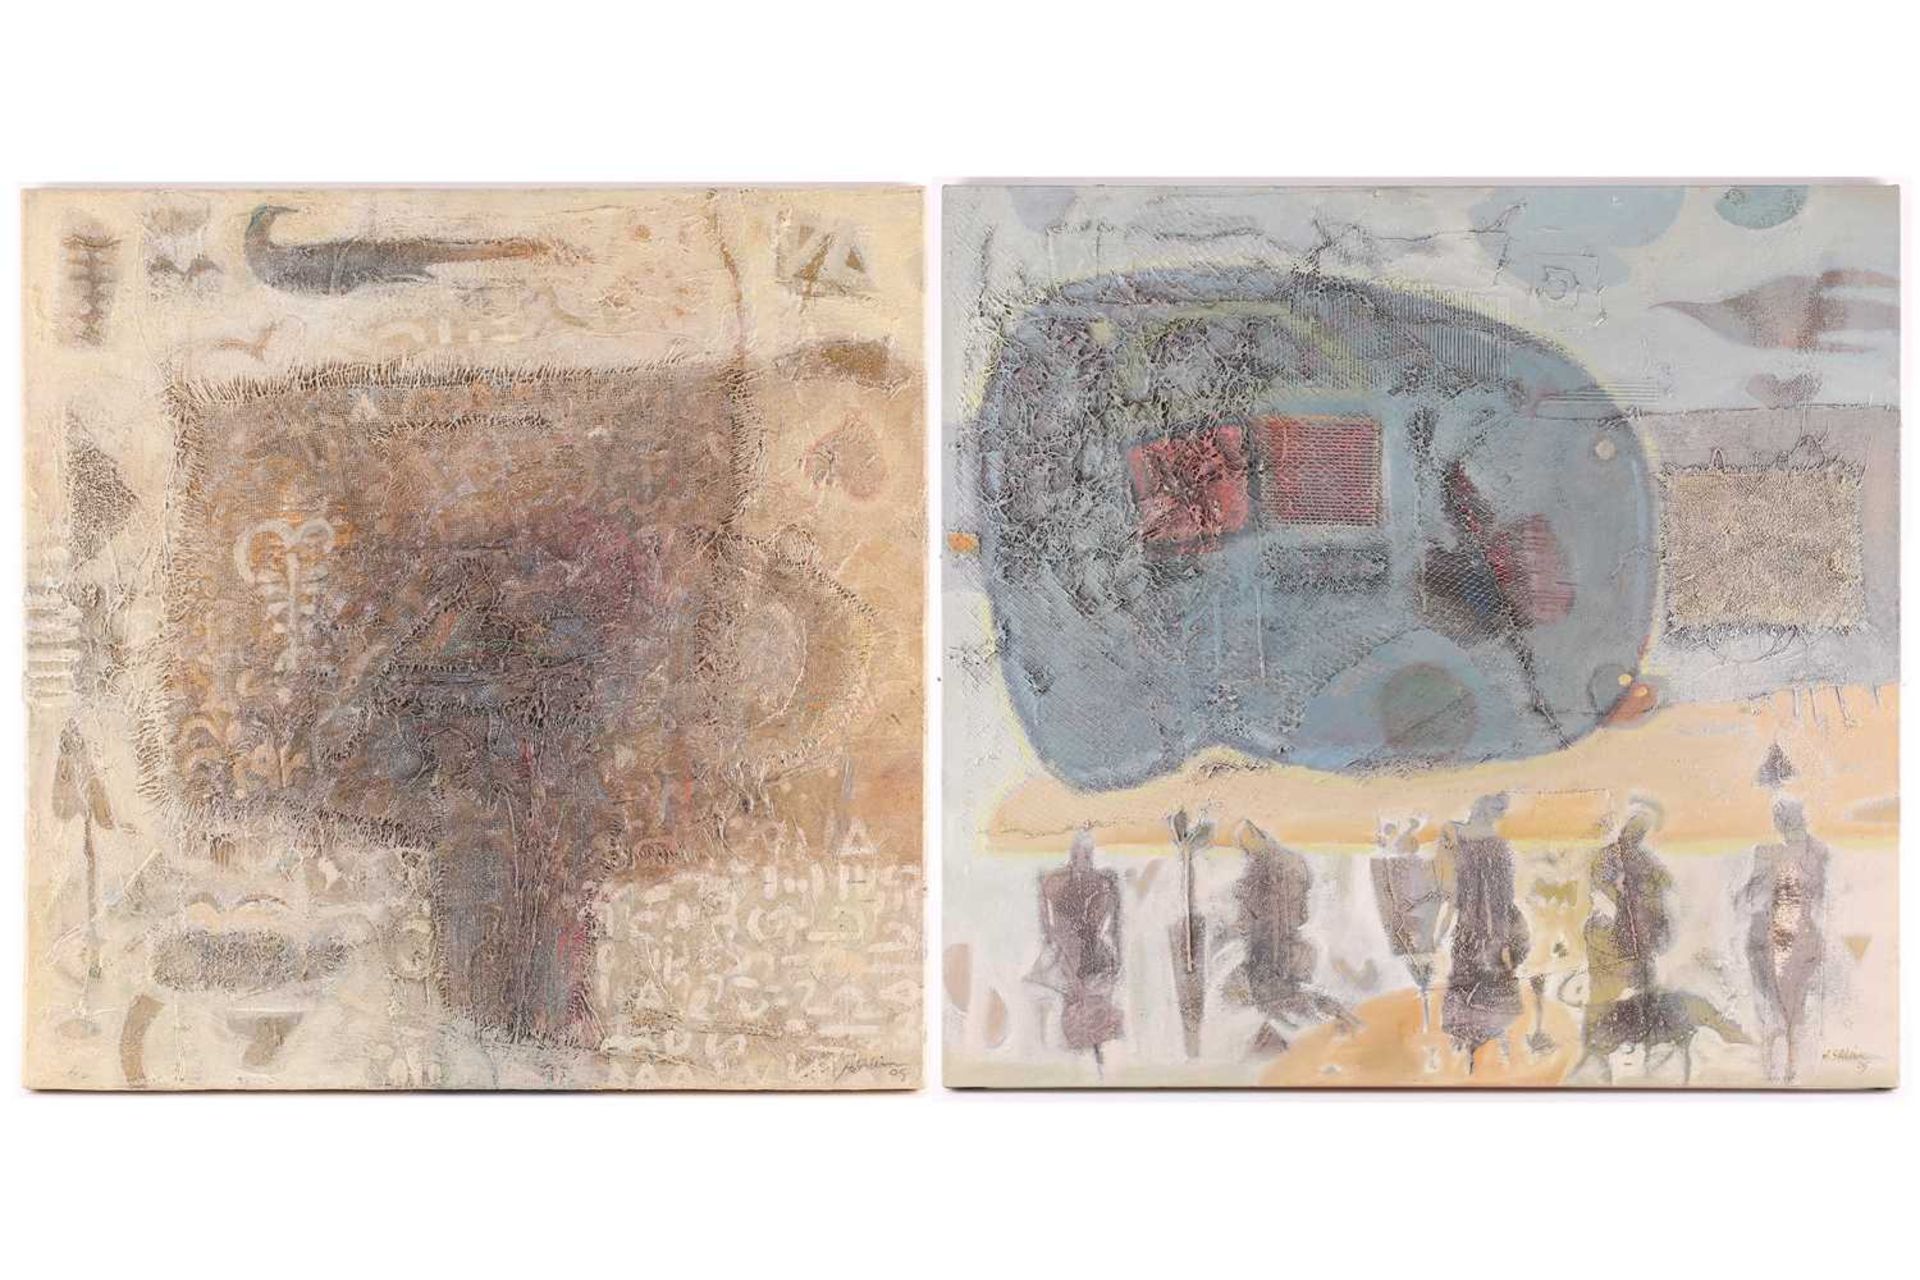 Hussein Salim (b.1966) Sudanese, two abstract studies on canvas, mixed media, 75 cm x 80 cm and 75